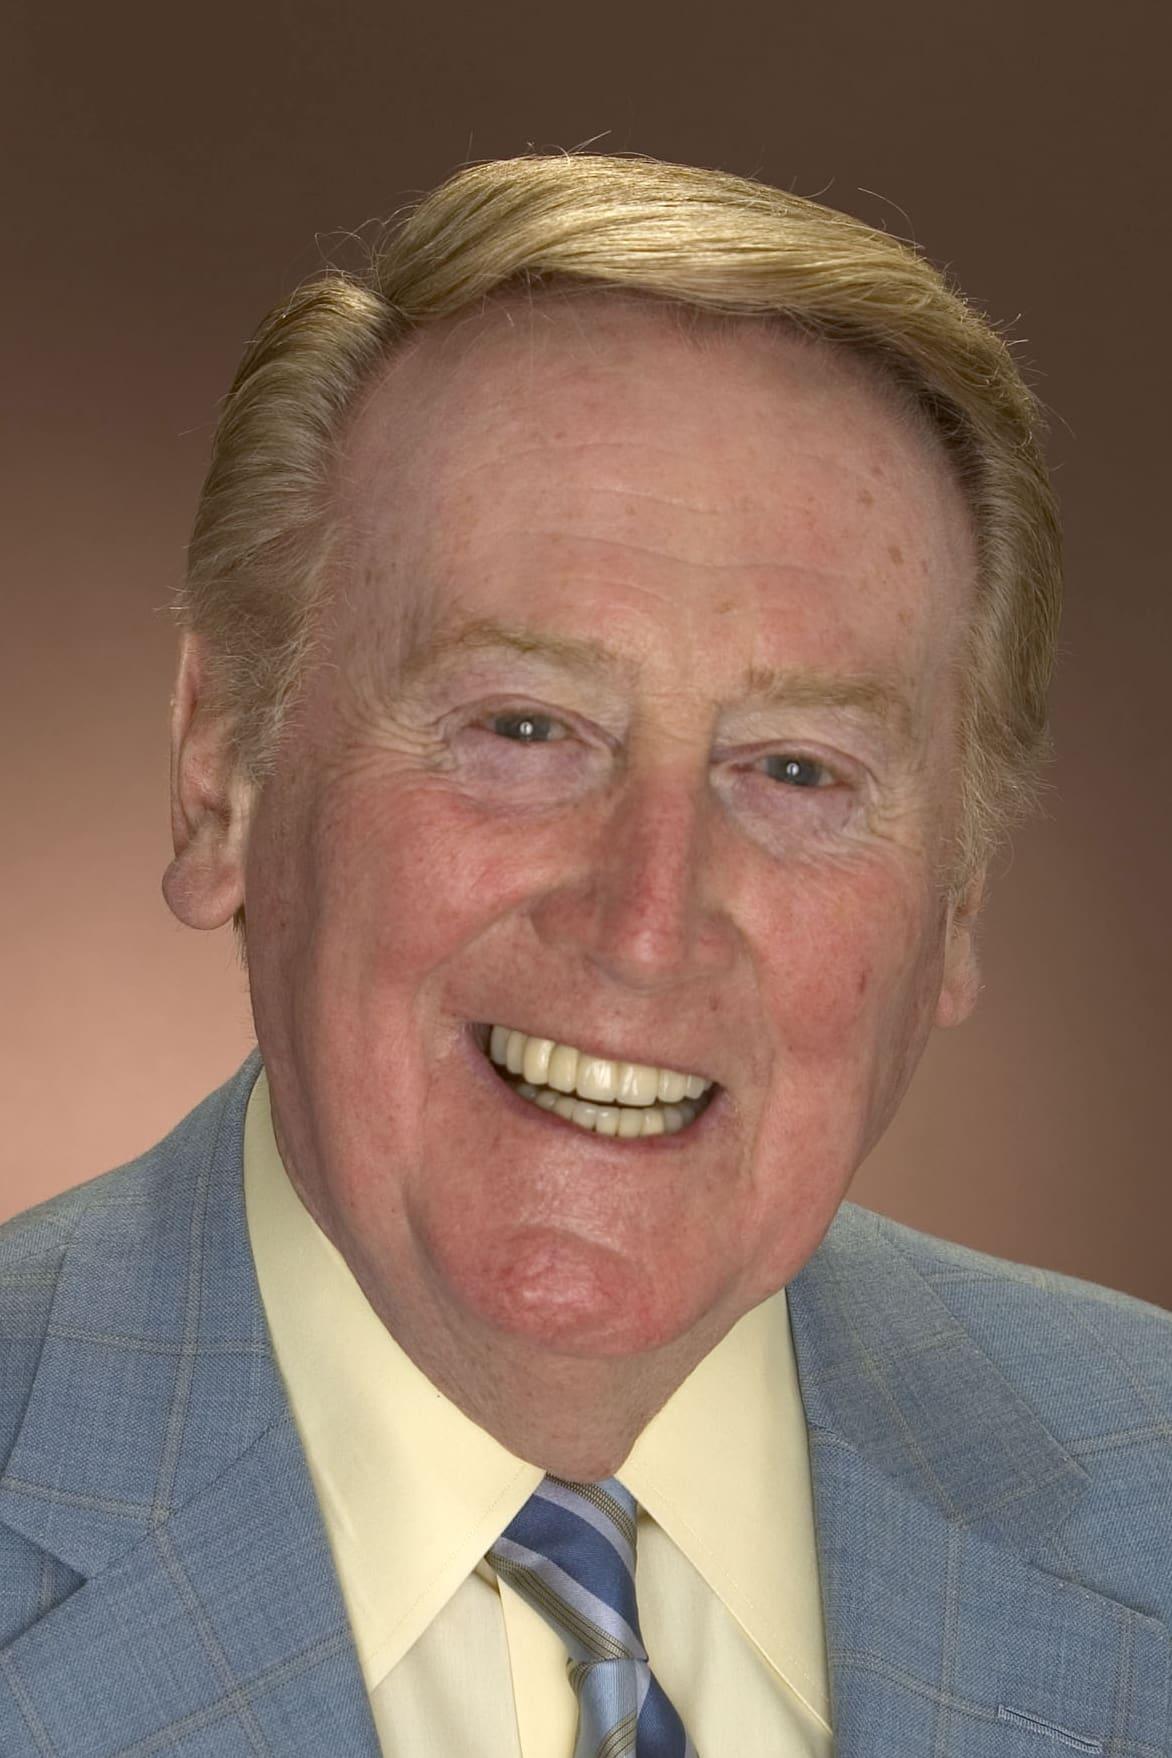 Vin Scully | Himself - baseball announcer (archive sound)